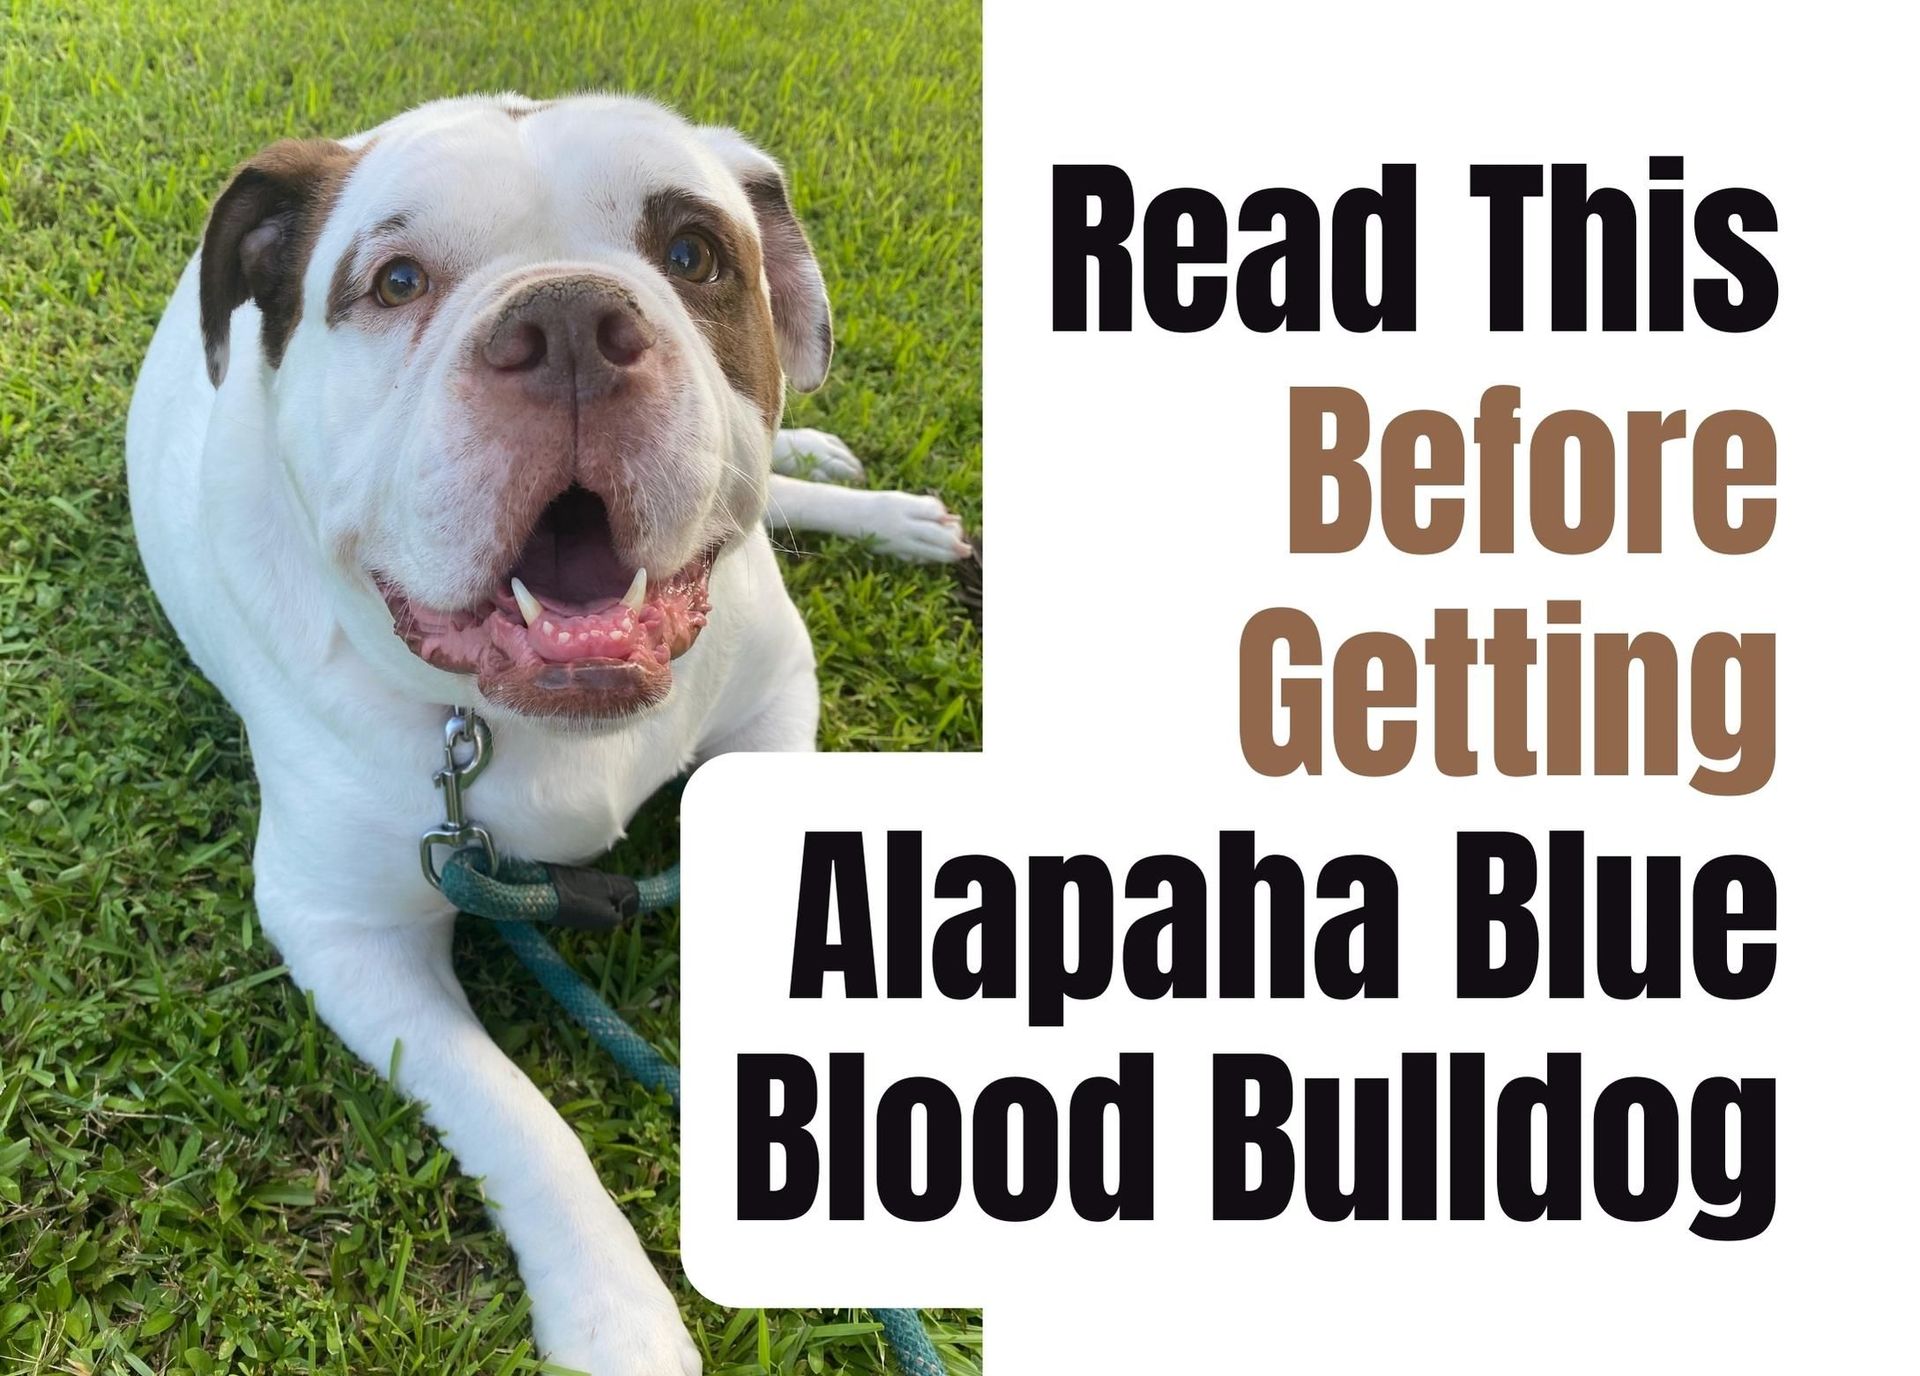 14 Things to Consider Before Buying an Alapaha Blue Blood Bulldog Puppy